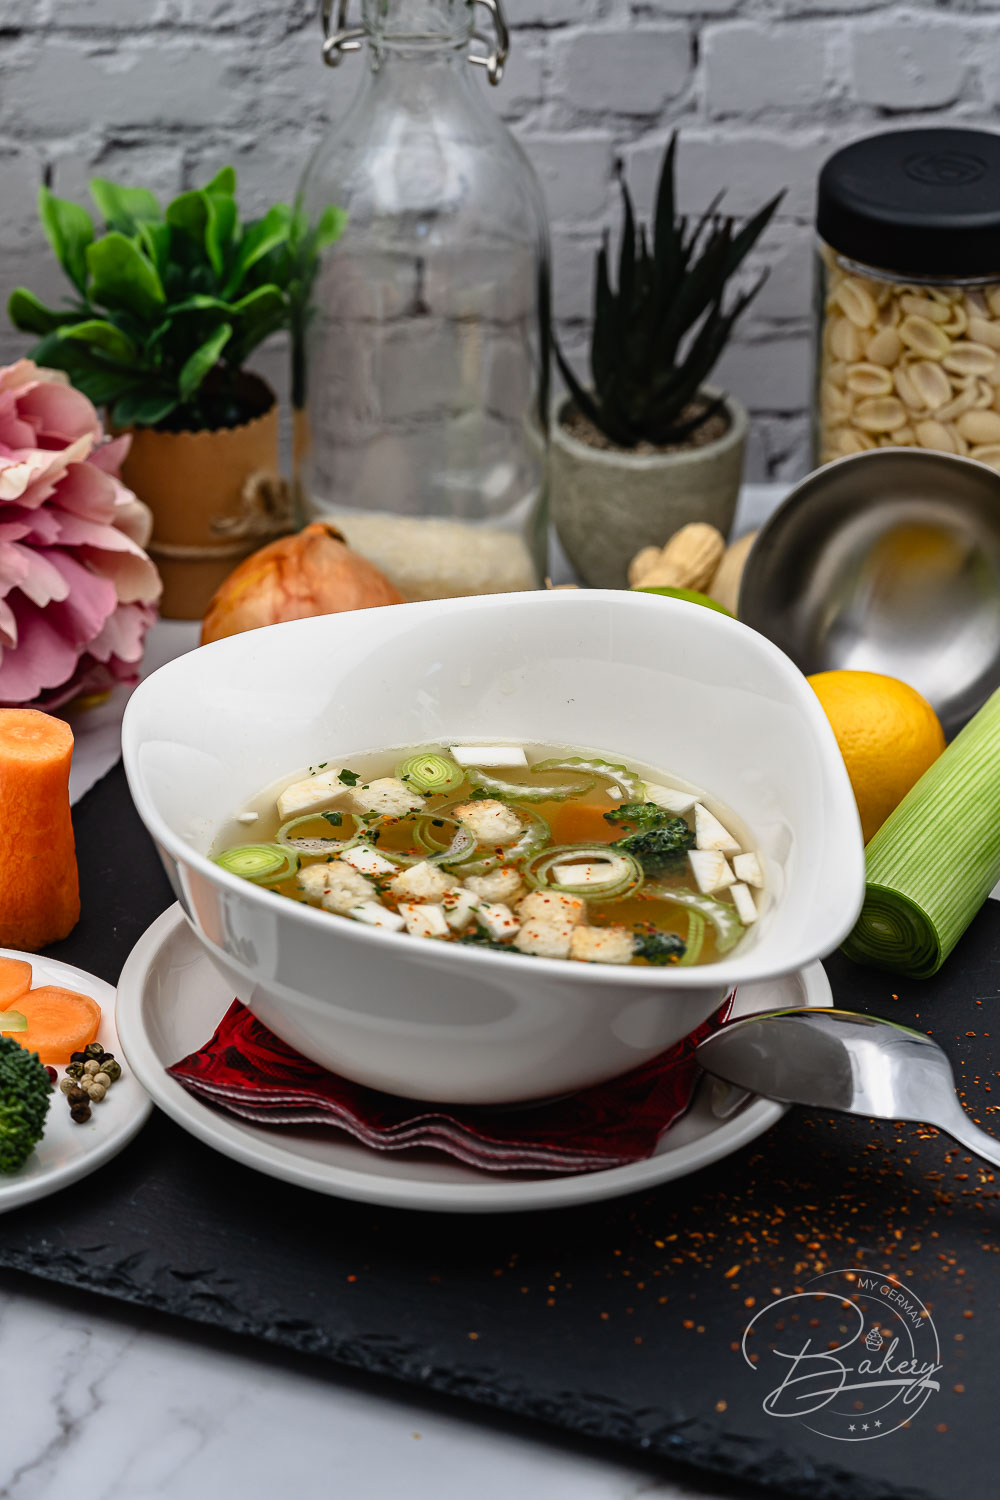 Classic chicken soup - simply explained - against colds - Classic chicken soup recipe is not only the perfect remedy for colds, but also very nutritious. Grandmother's soup recipe